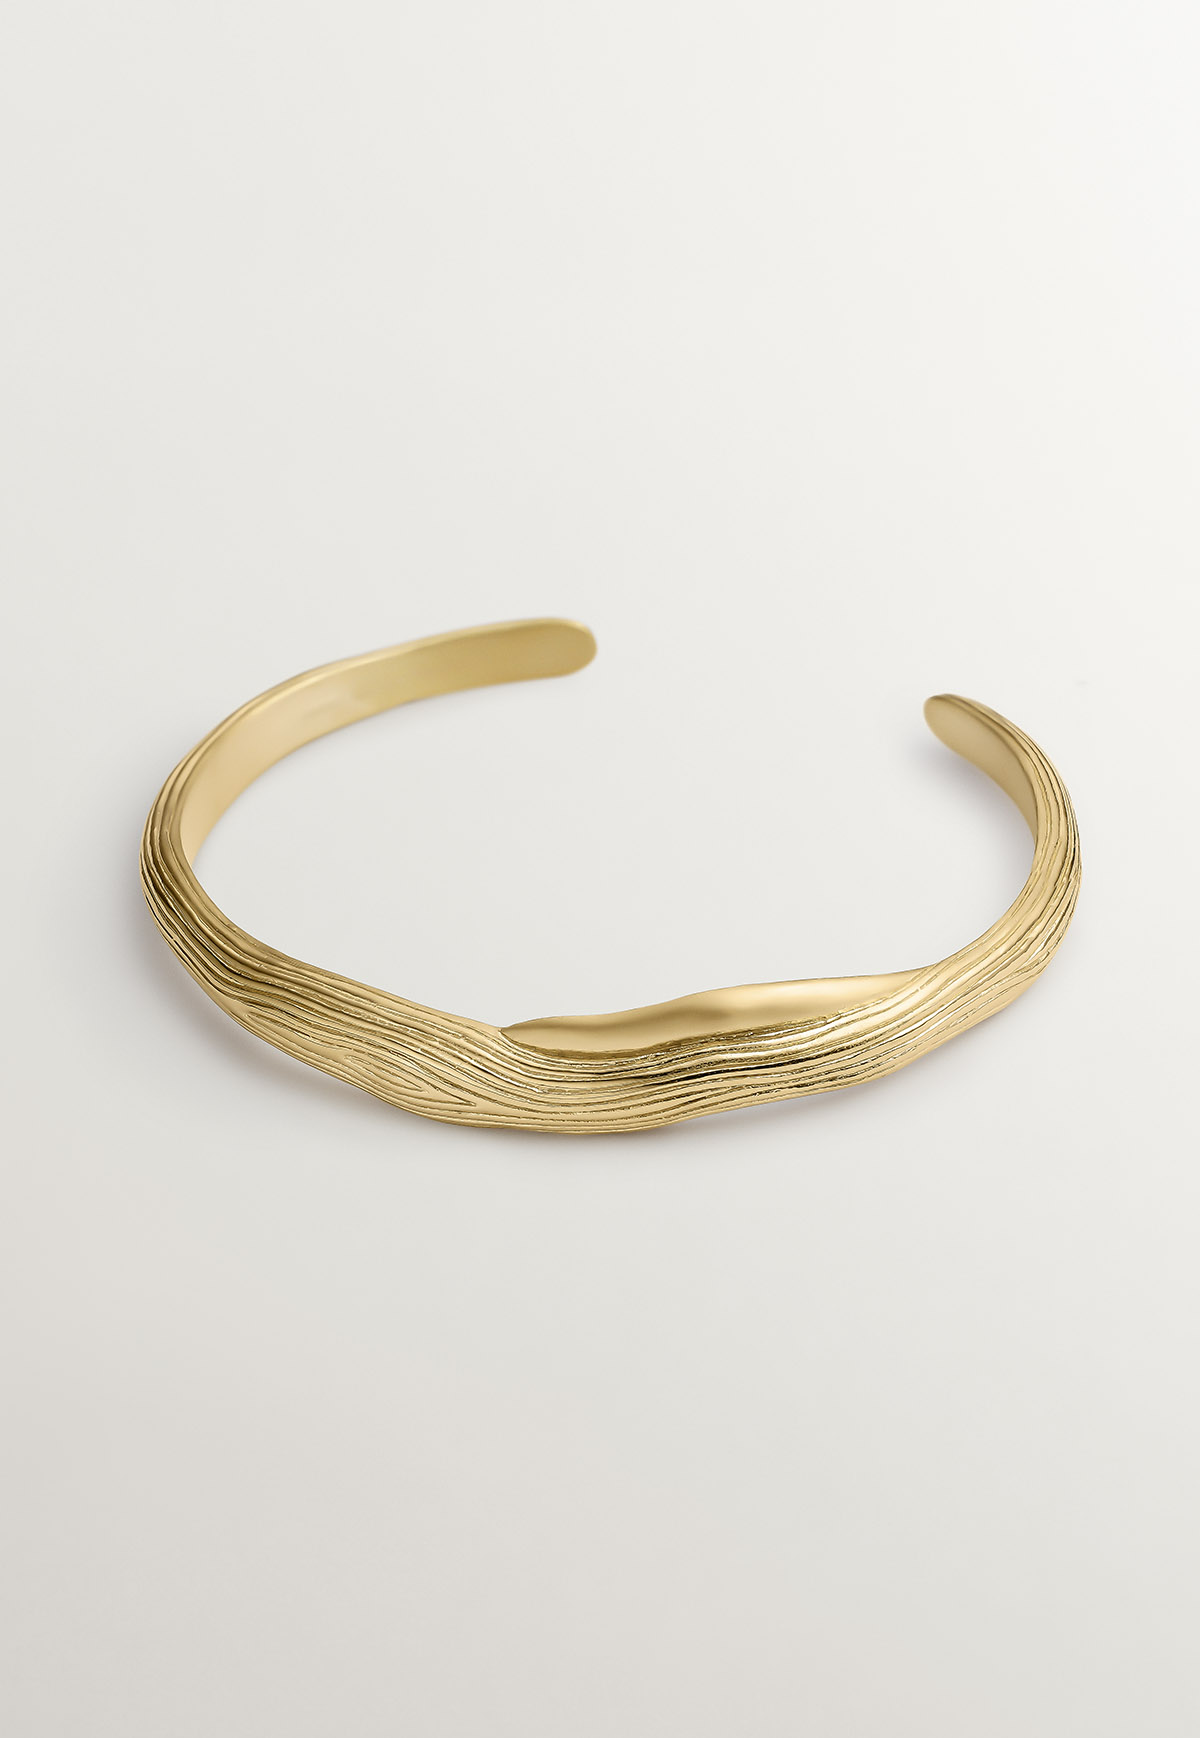 925 Silver bracelet coated in 18K yellow gold with embossed and irregular shape.